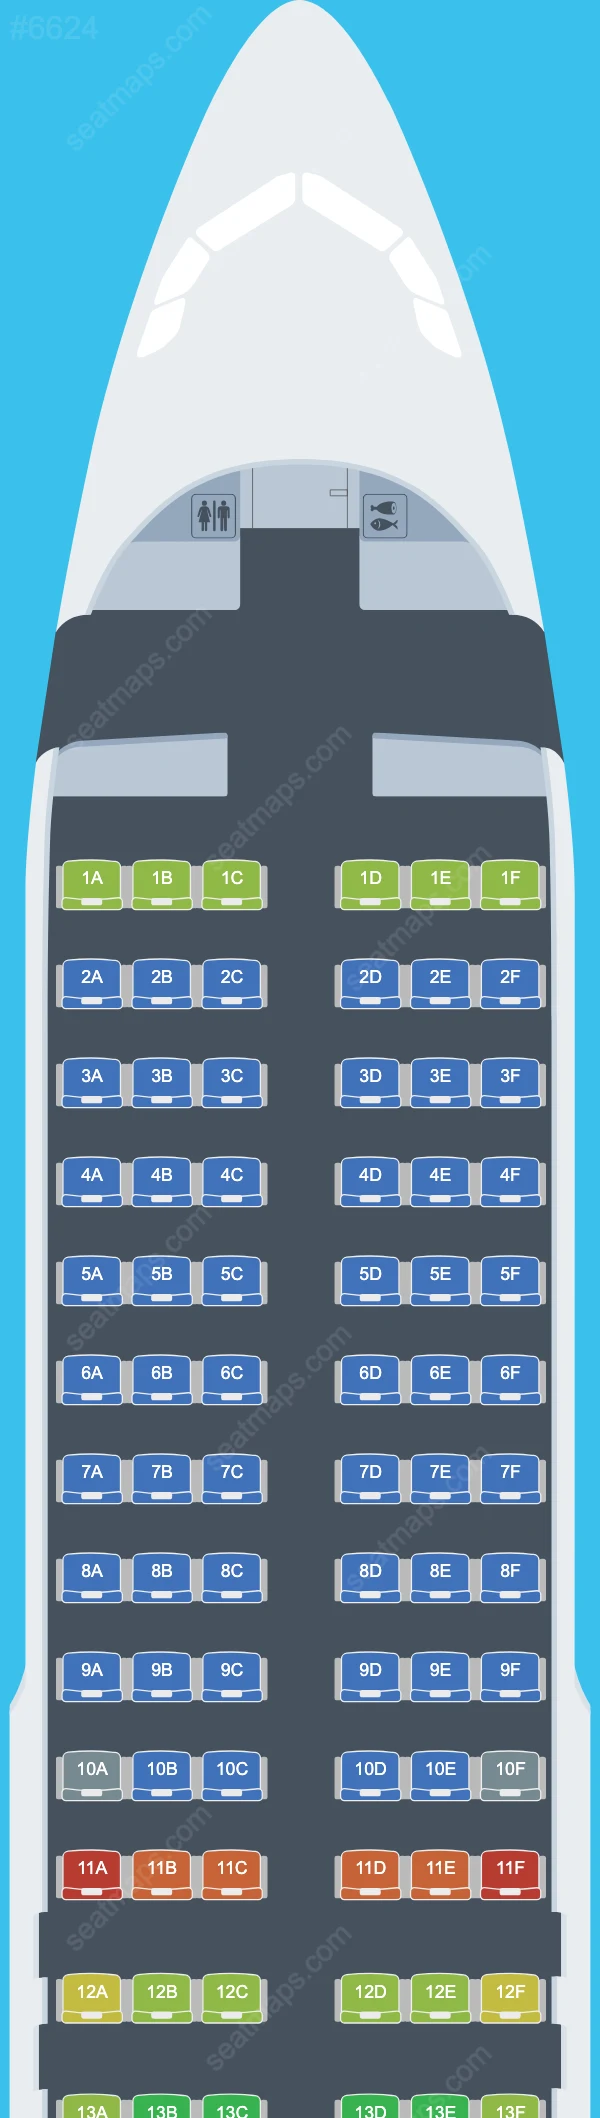 easyJet UK Airbus A320neo aircraft seat map  A320neo